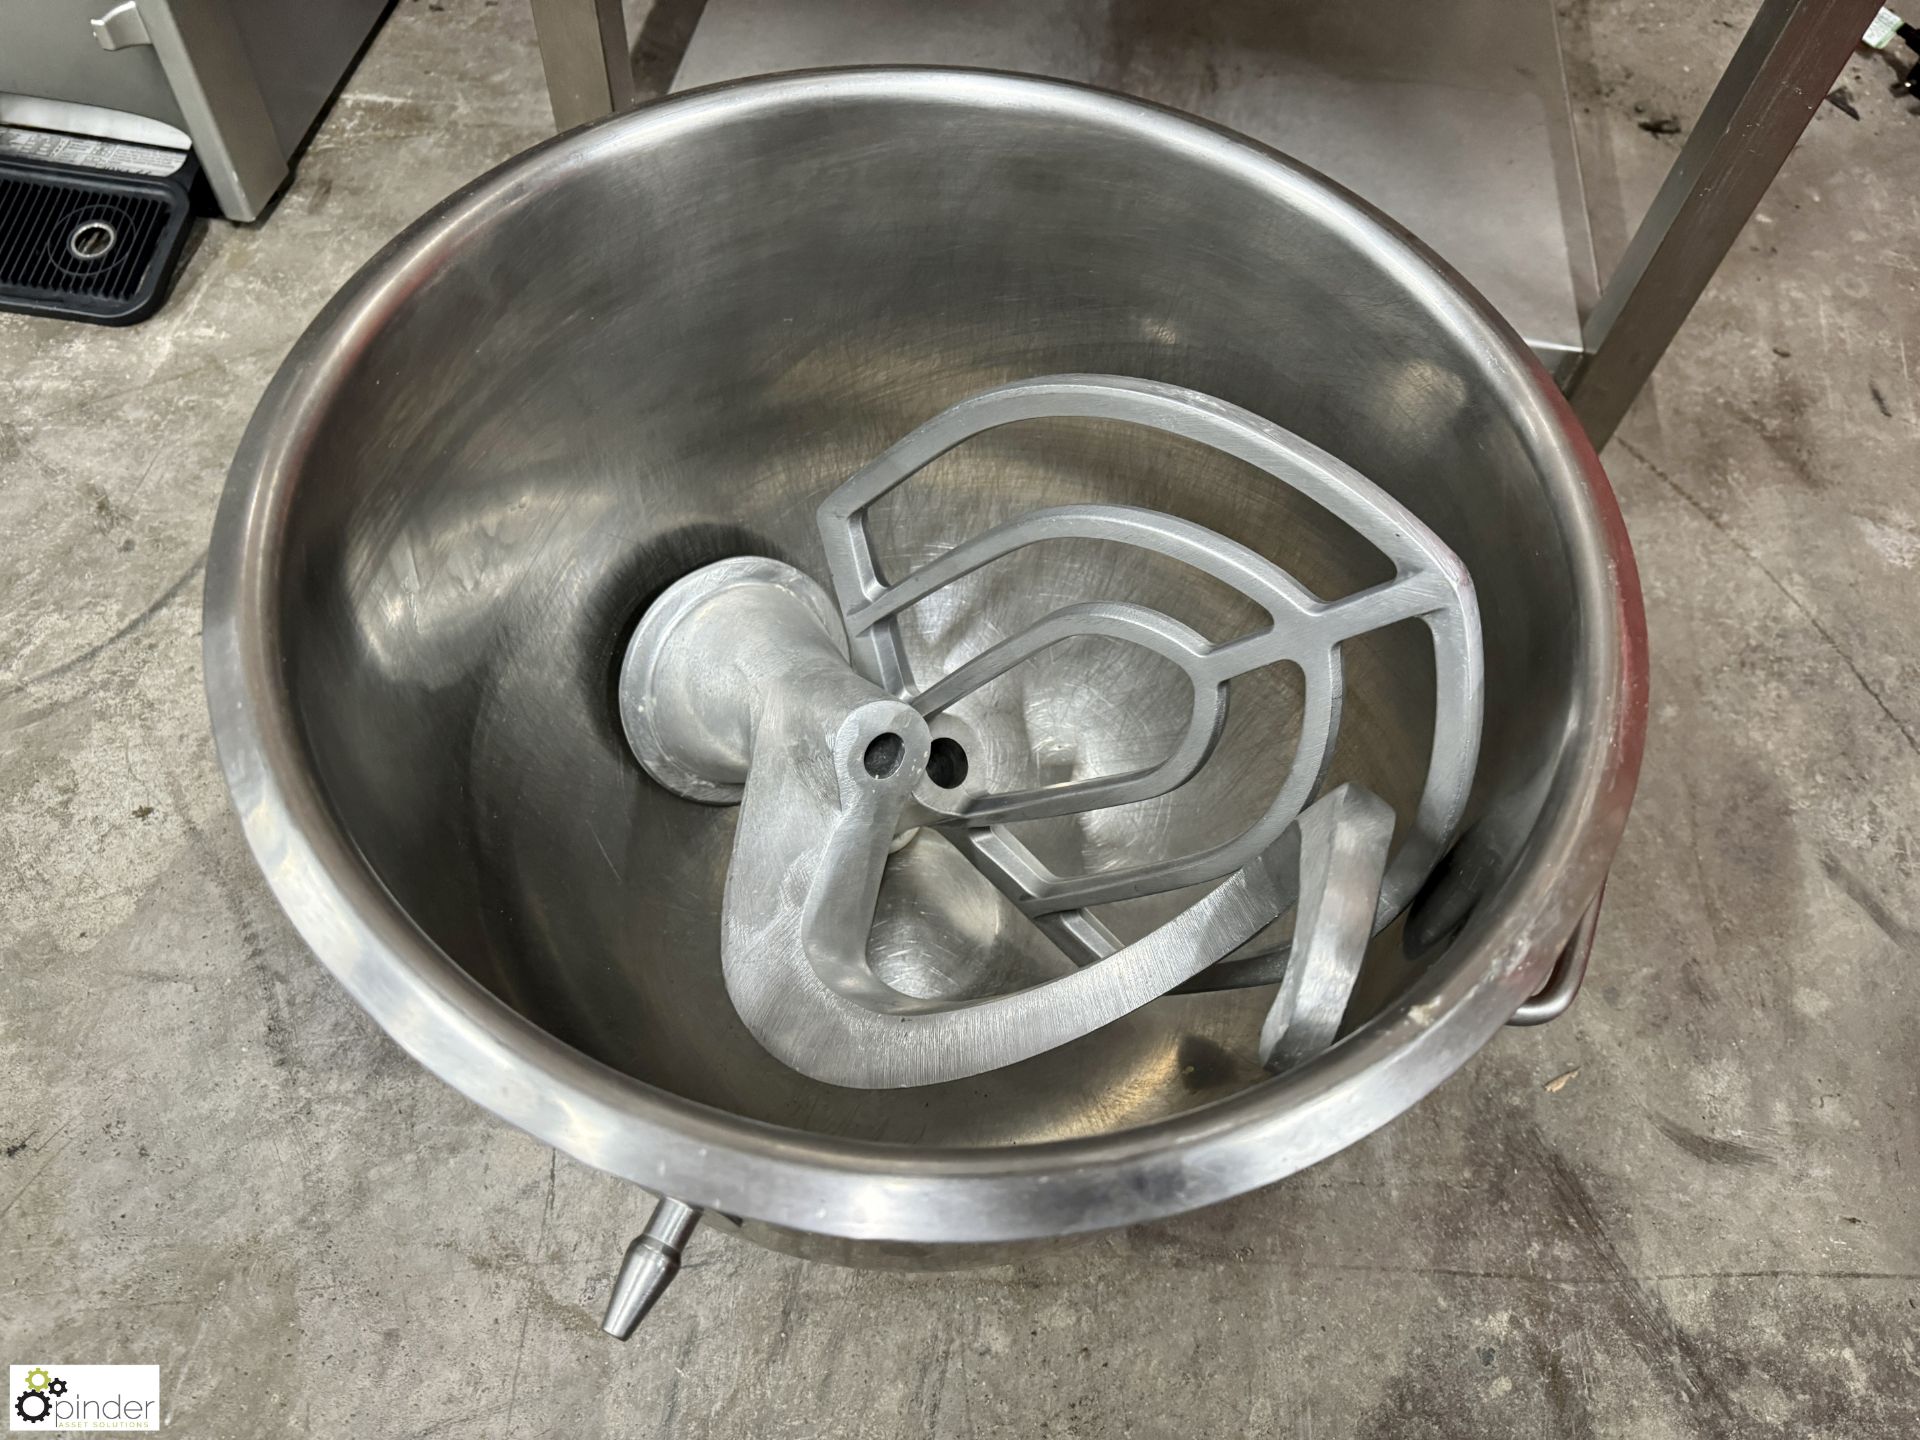 Spar Food Machinery SP-22HA-B Planetary Food Mixer, 240volts, with 2 bowls, whisk, dough hook, - Image 7 of 8